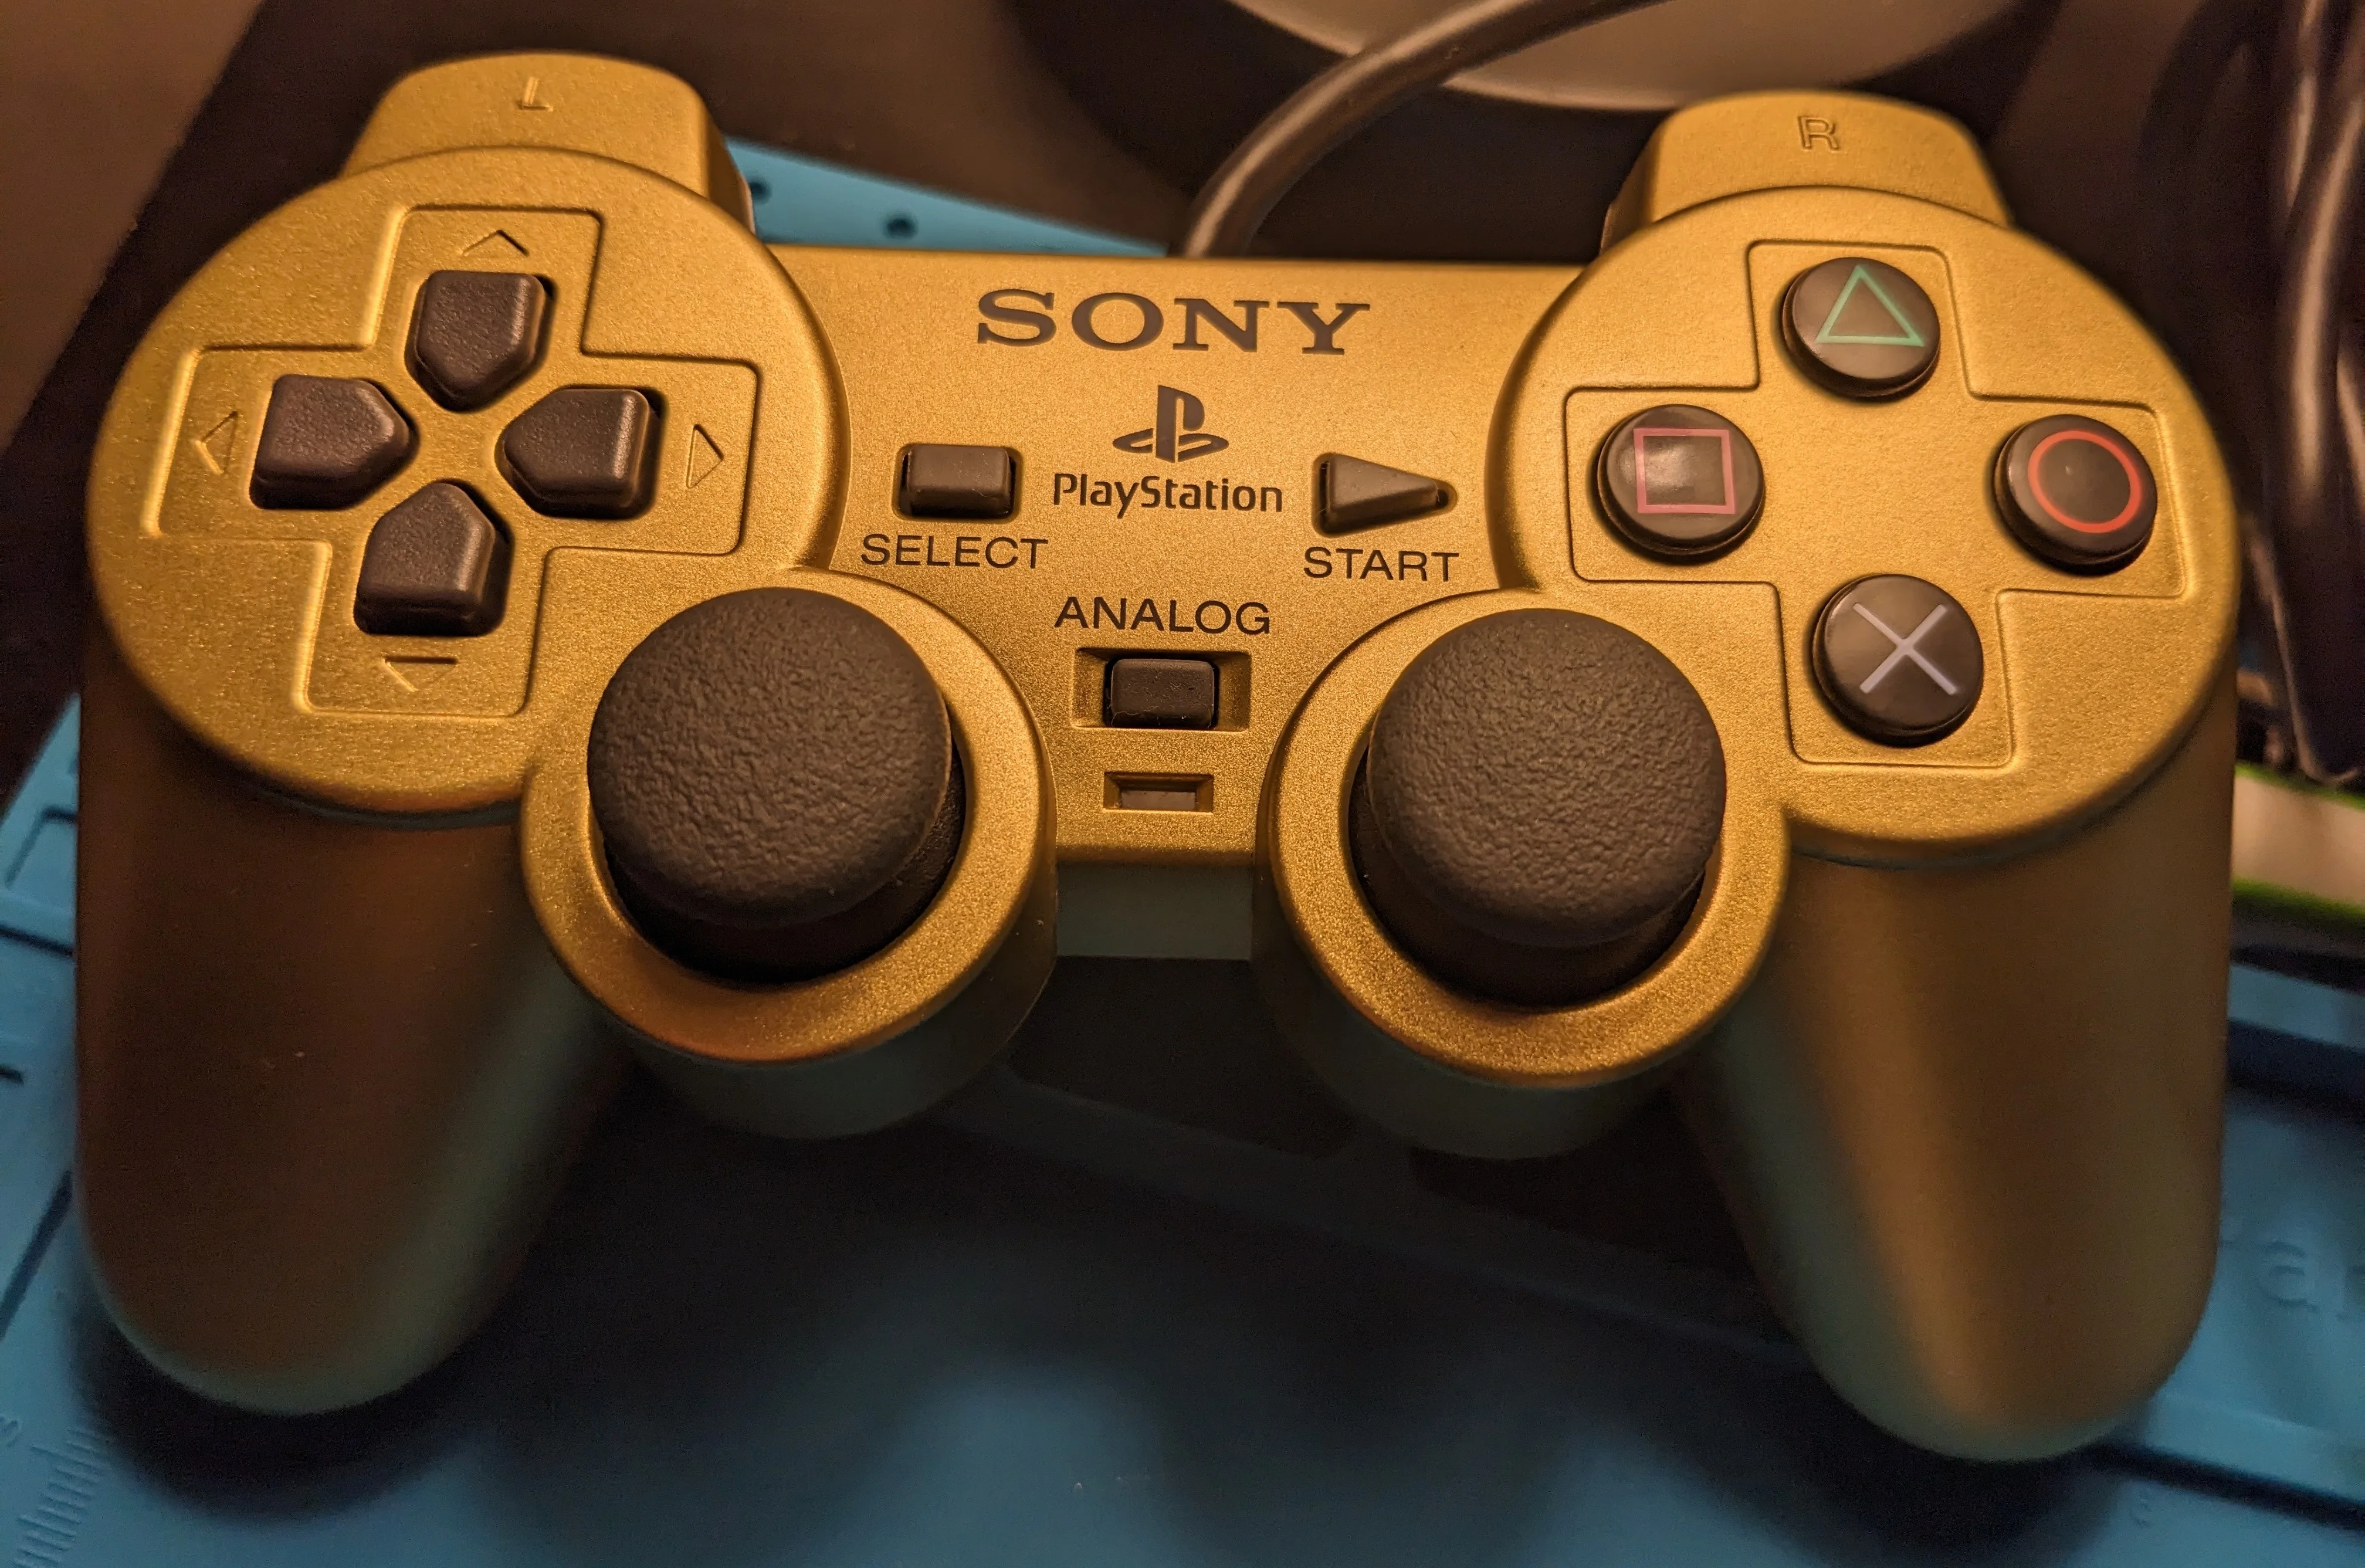 Sony PlayStation 2 Automotive Edition Light Yellow Console